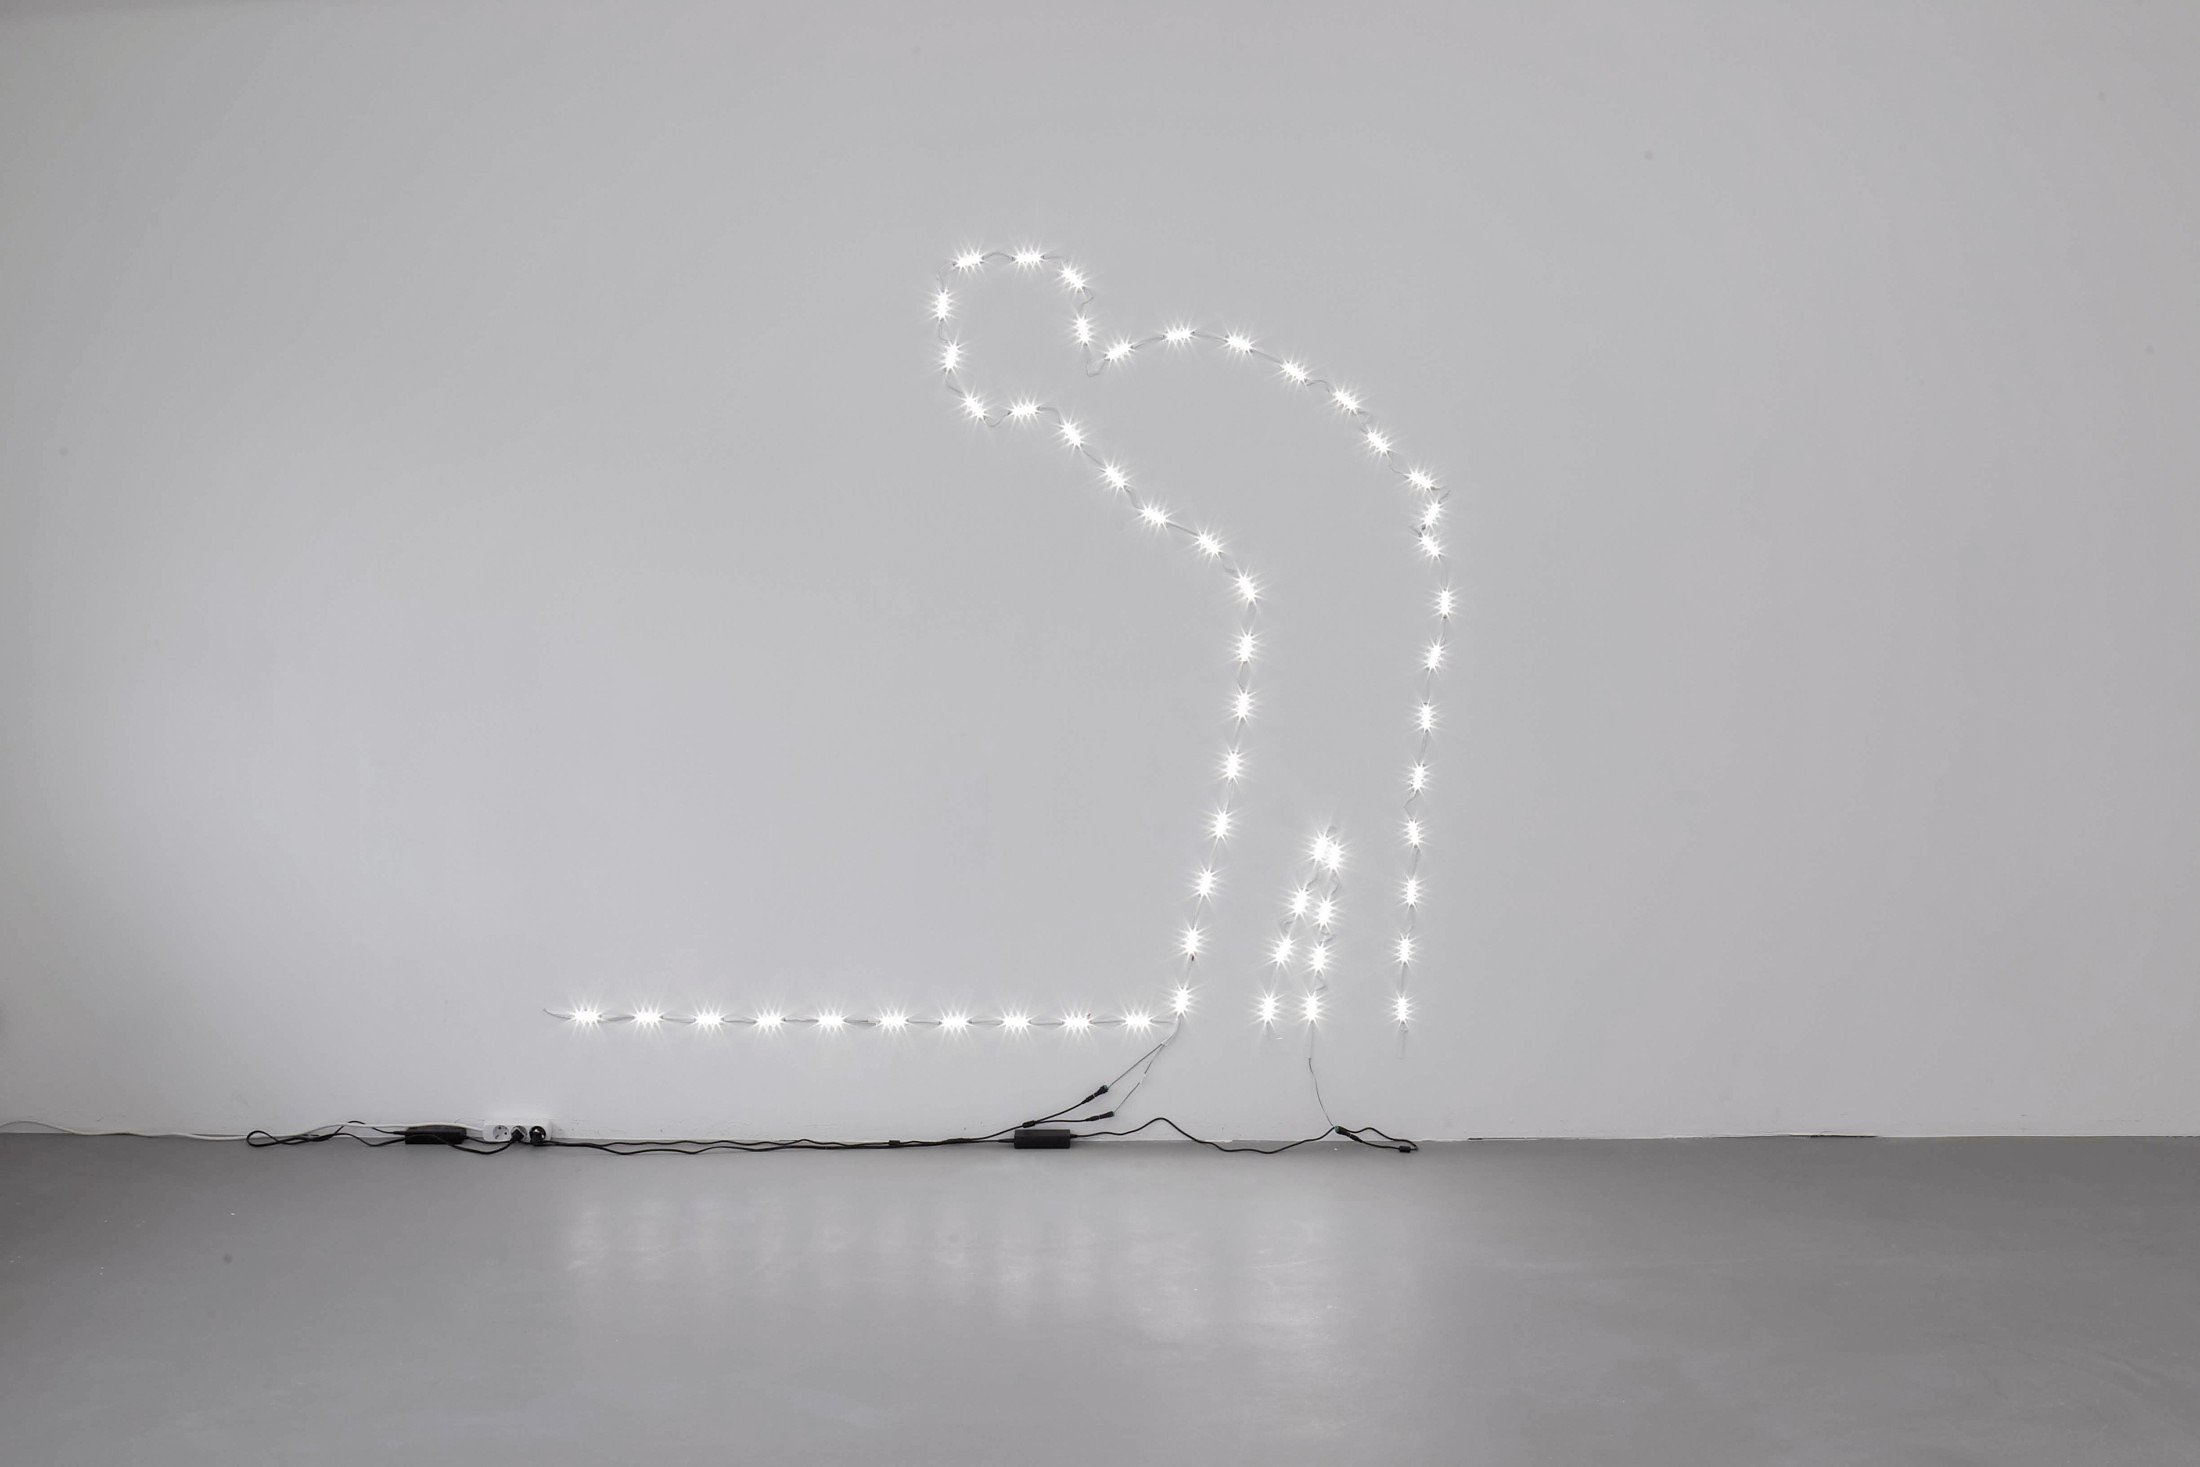 Untitled
80×89″
S5630 Waterproof LED lights, electrical cords, electrical transformers, gaffer tape
2019
